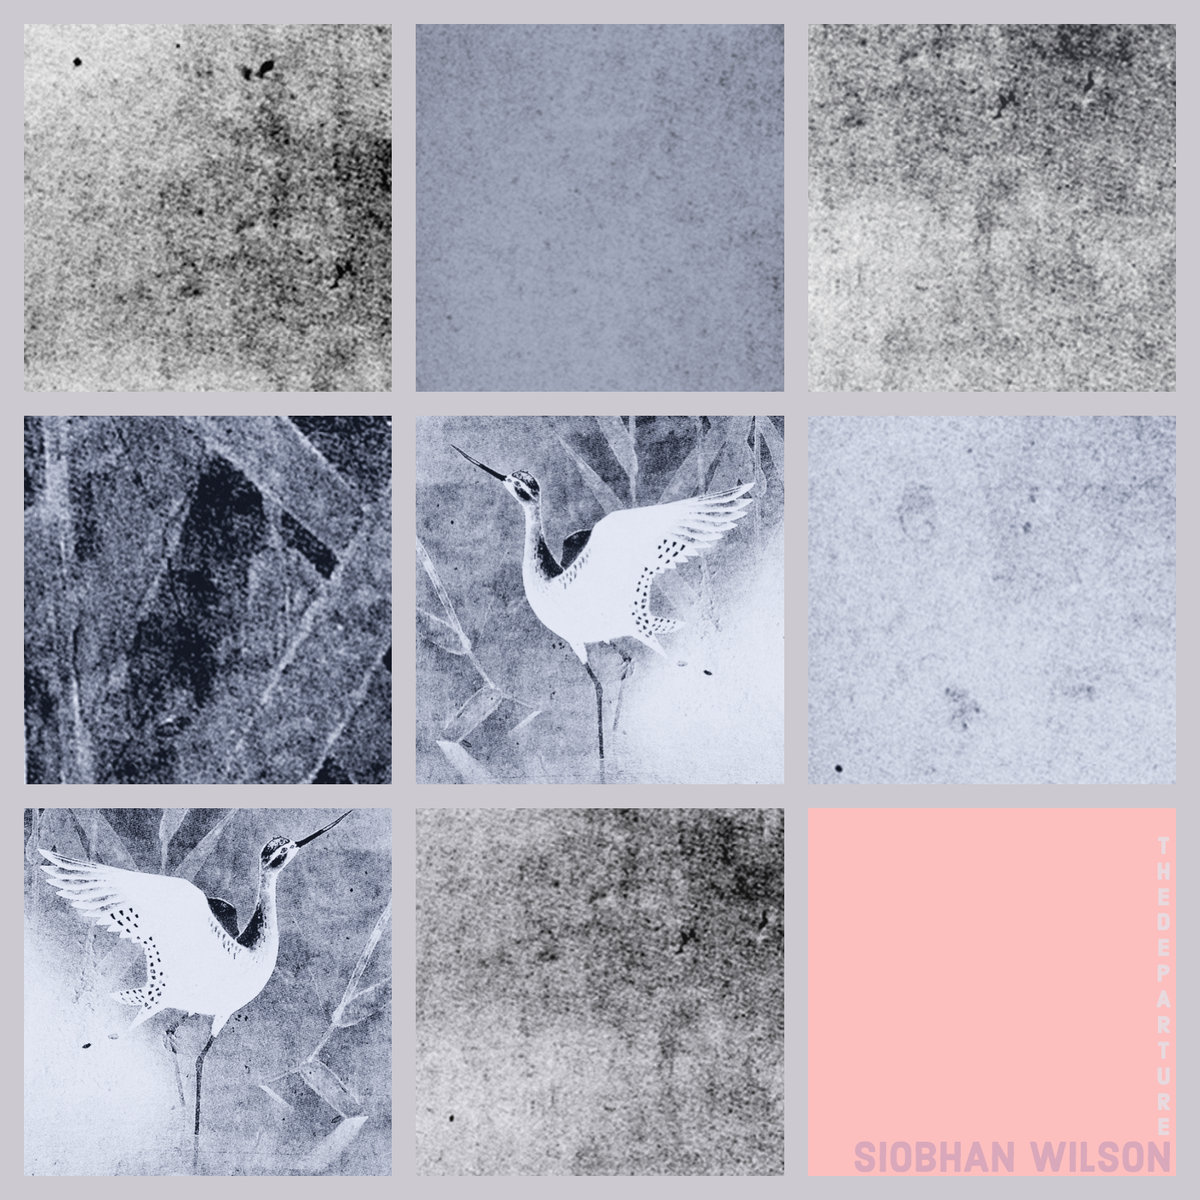 Siobhan Wilson - The Departure (Suffering Fools Records)